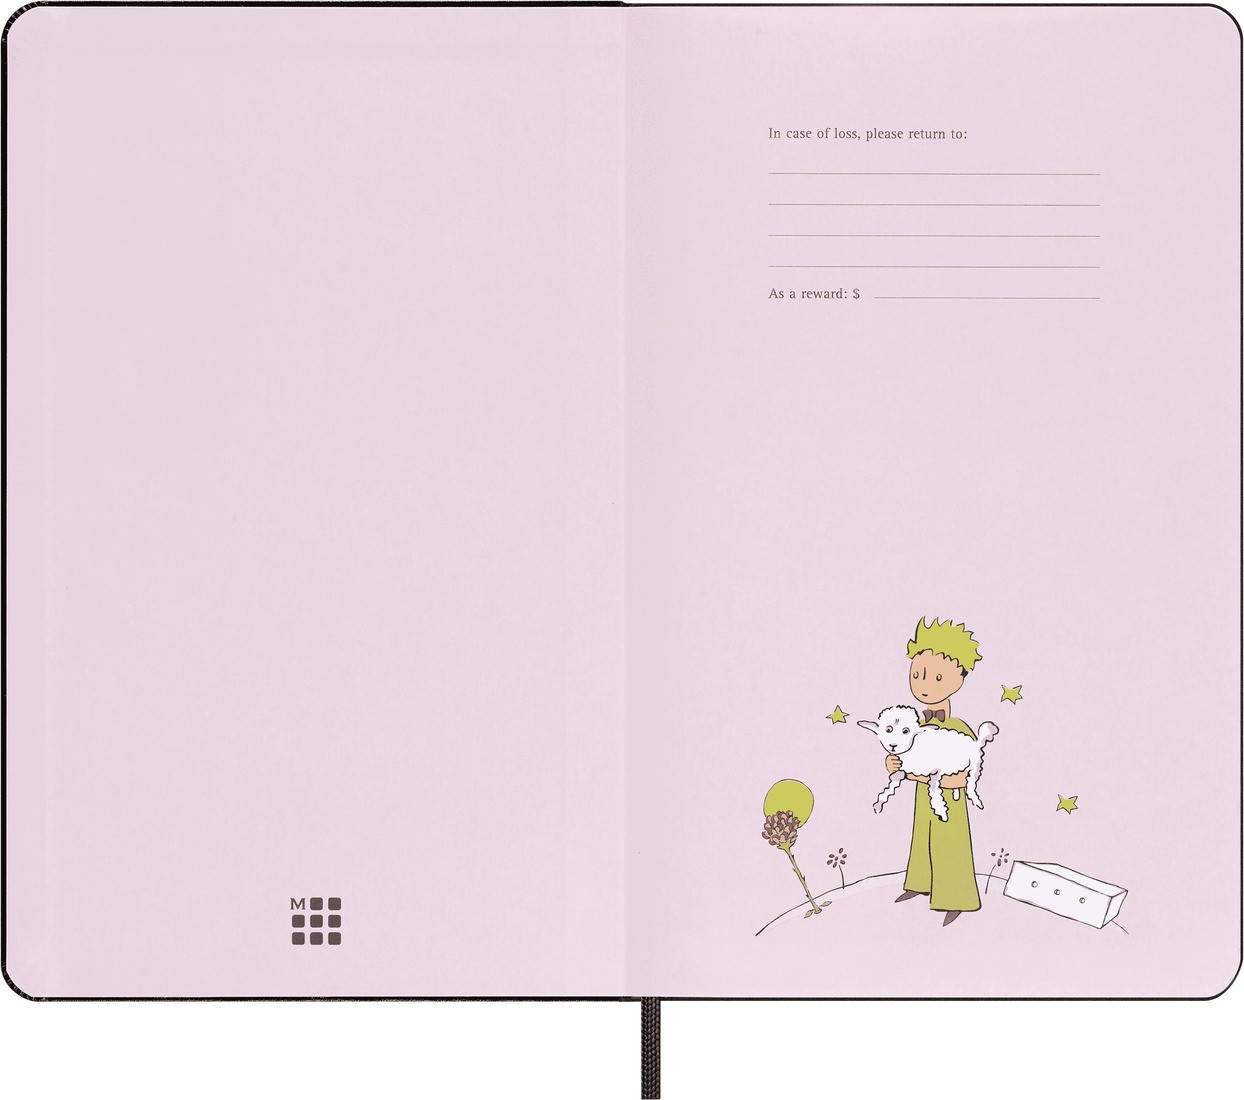 Moleskine Le Petit Prince Limited Edition Notebook Large 13x21, Hard Cover, Ruled, with Gift Box